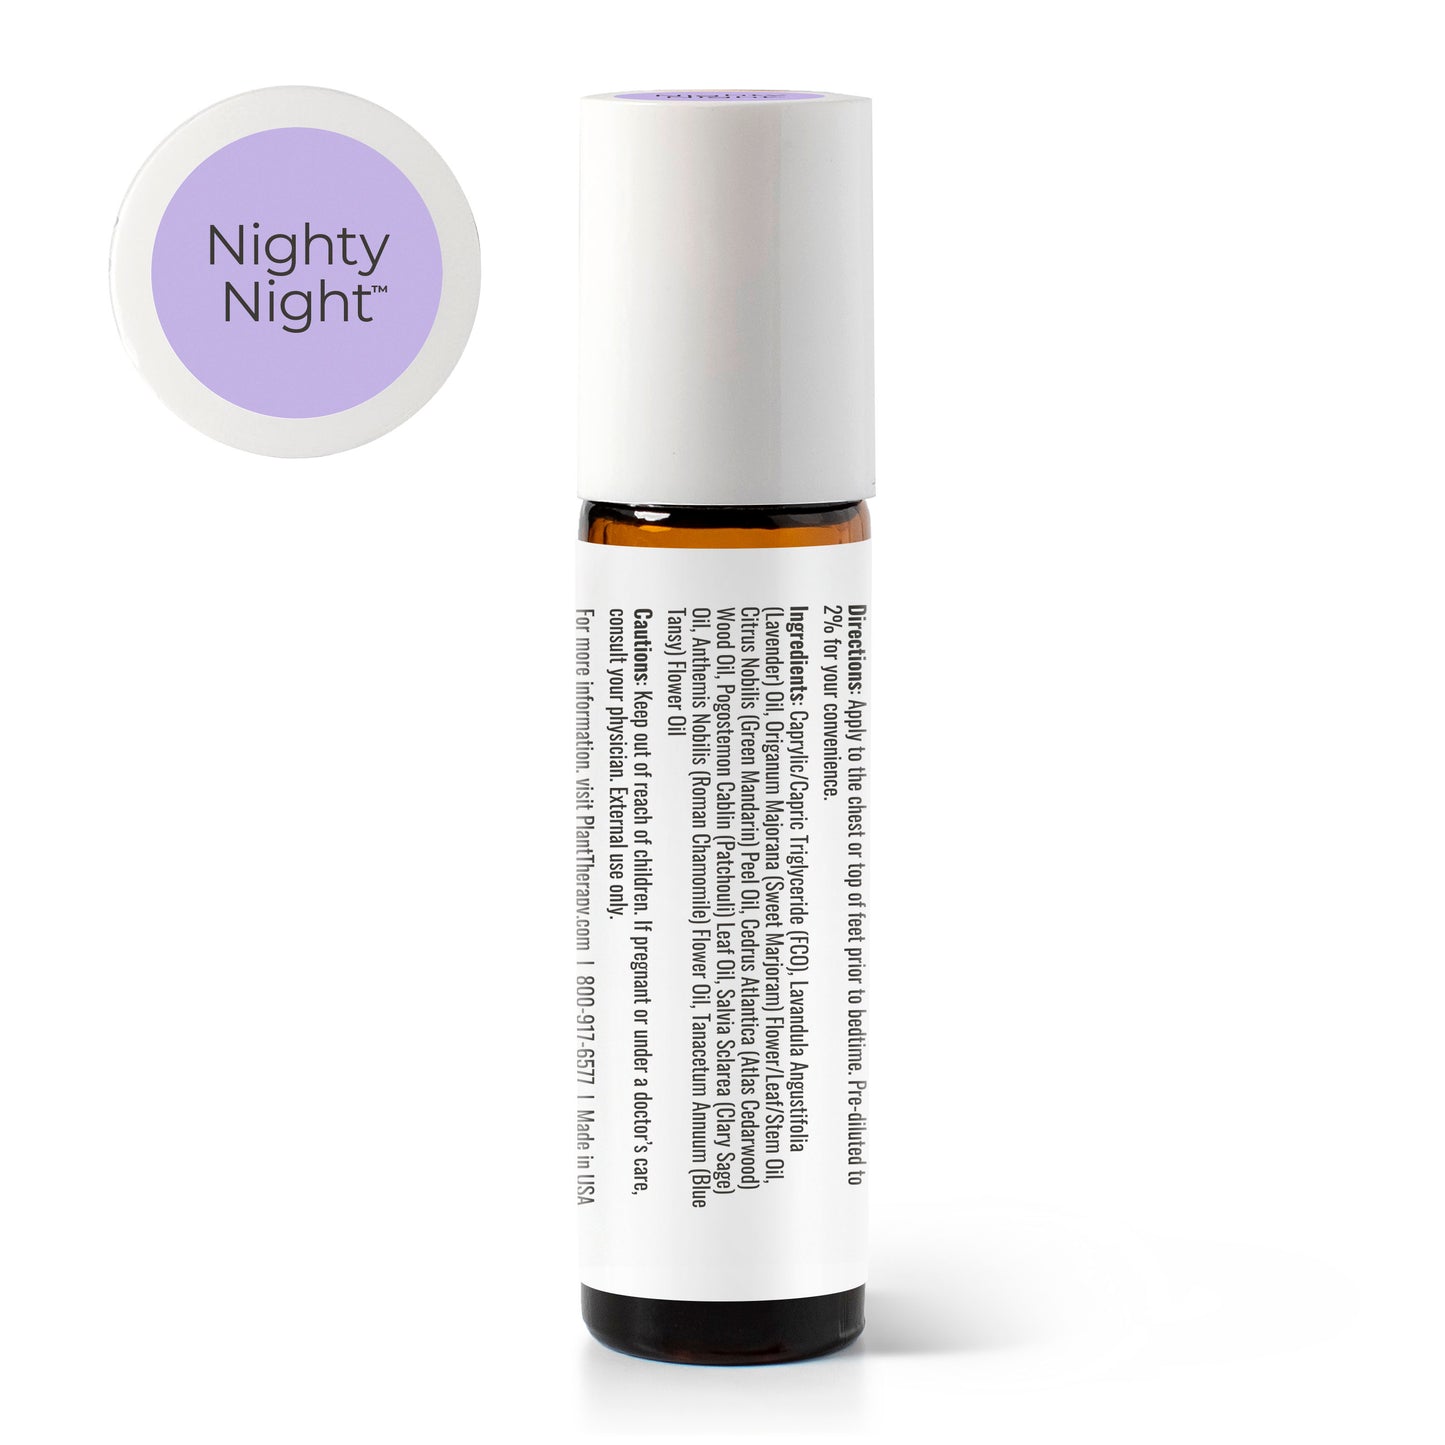 Nighty Night KidSafe Essential Oil Pre-Diluted Roll-On back ingredients panel